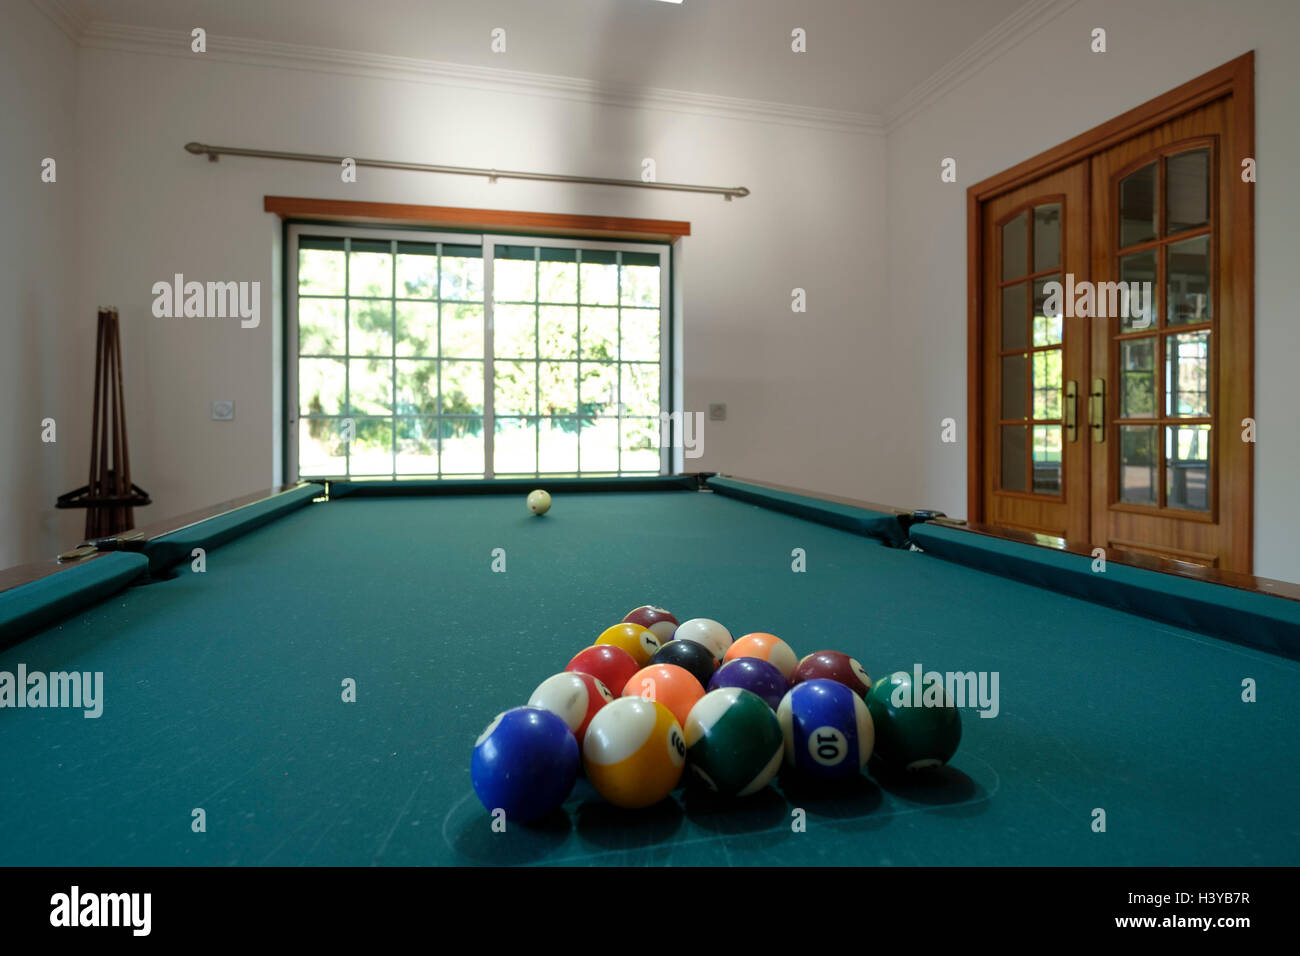 snooker at home